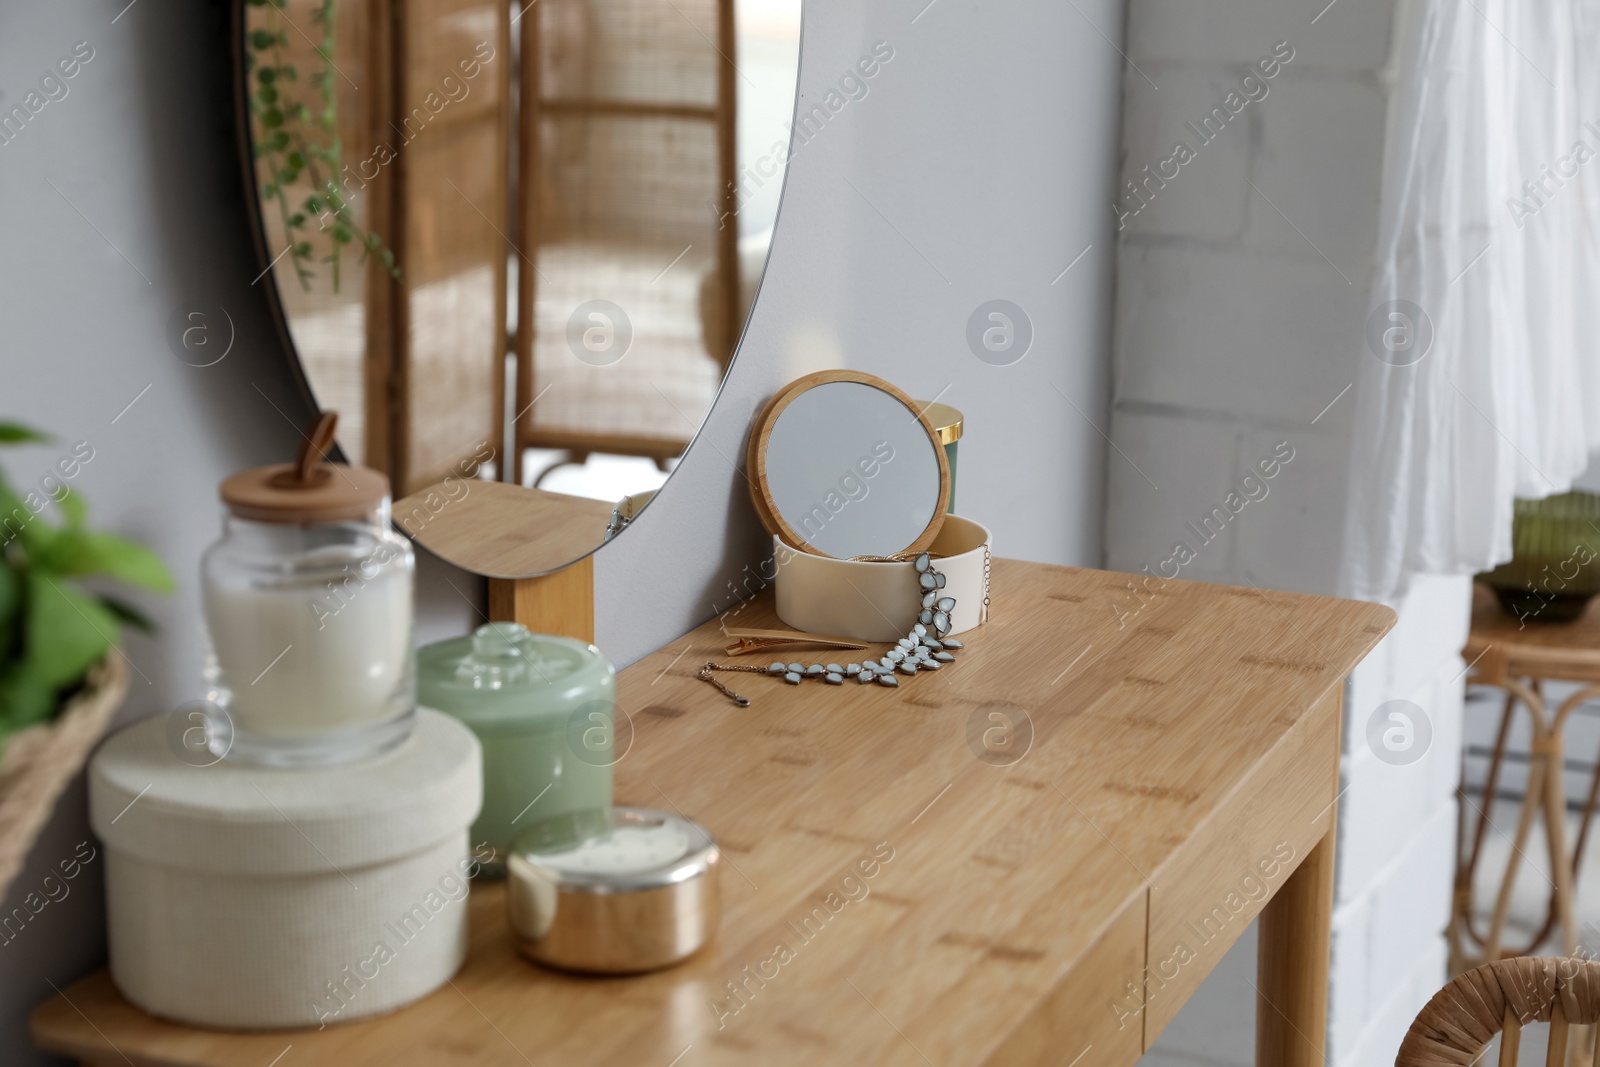 Photo of Wooden dressing table with decorative elements in room